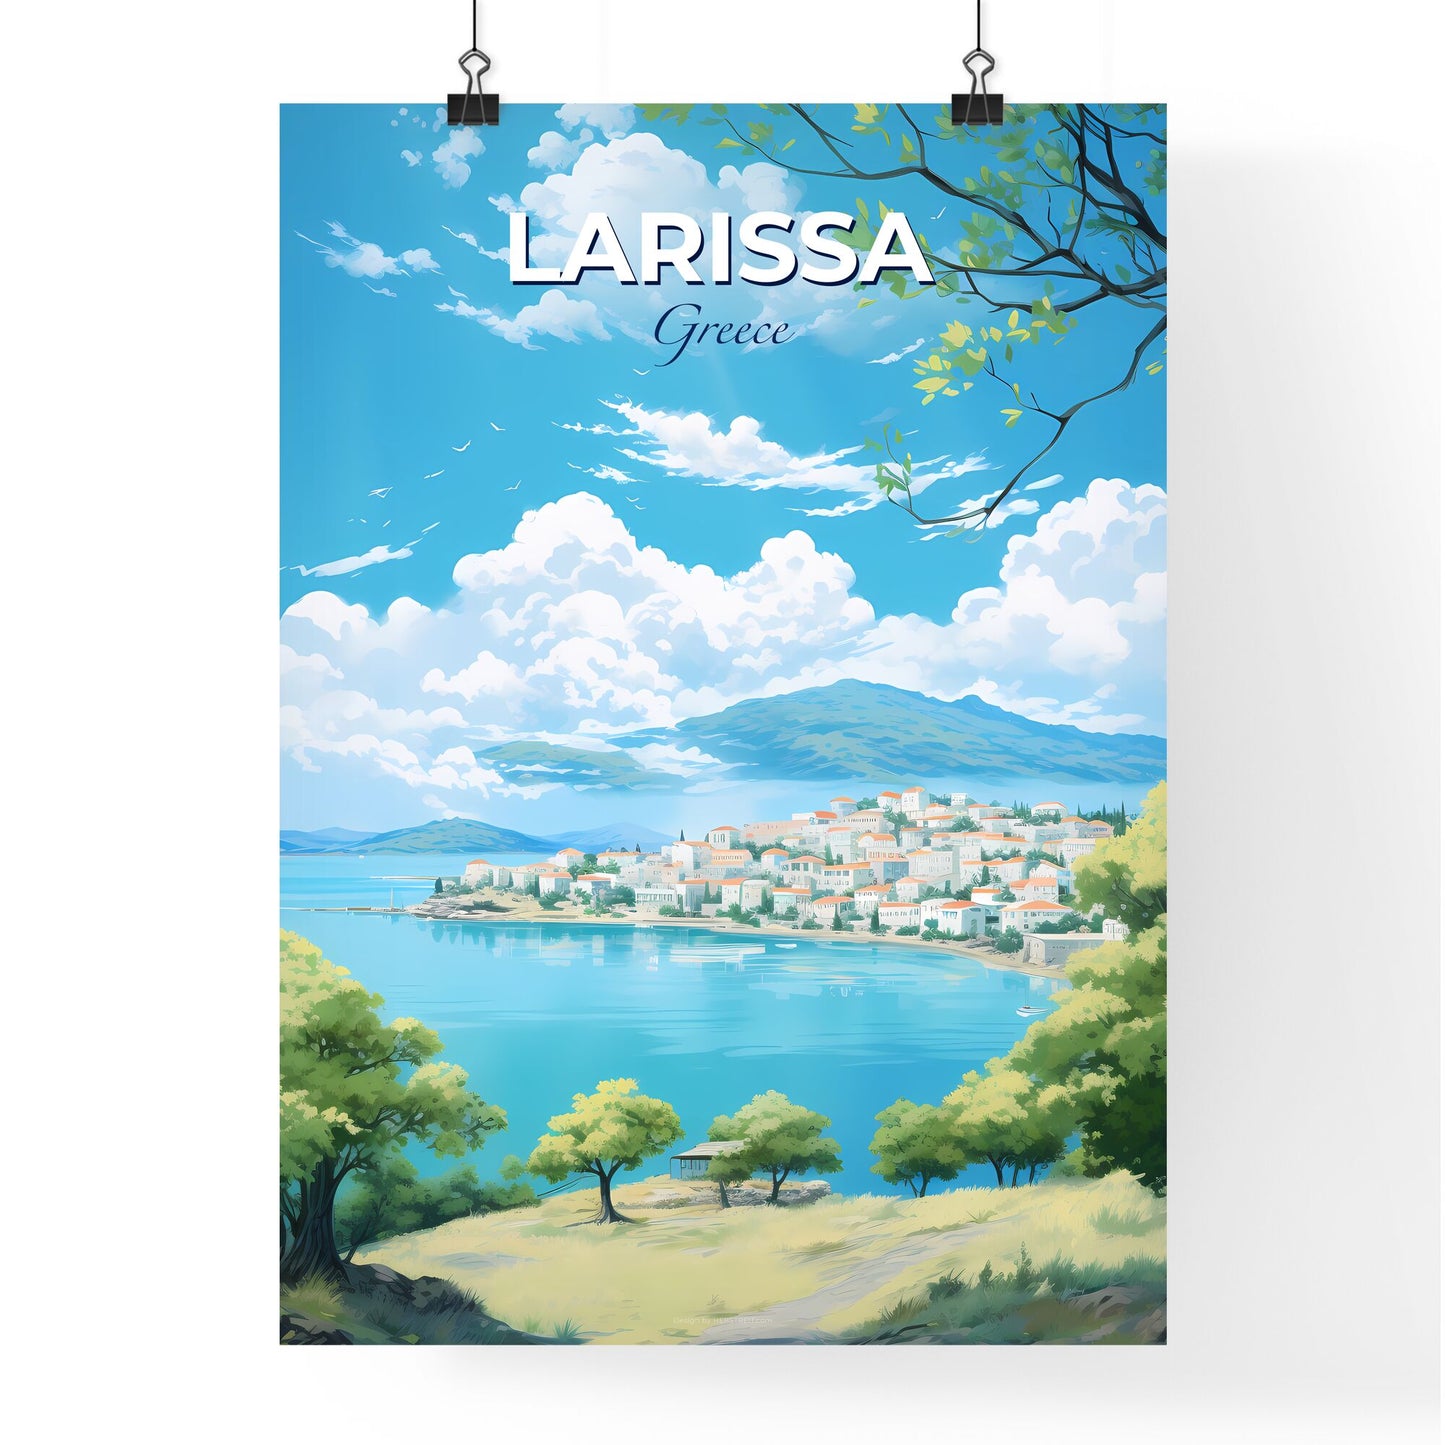 Larissa Greece Skyline - A Landscape Of A Town By A Body Of Water - Customizable Travel Gift Default Title